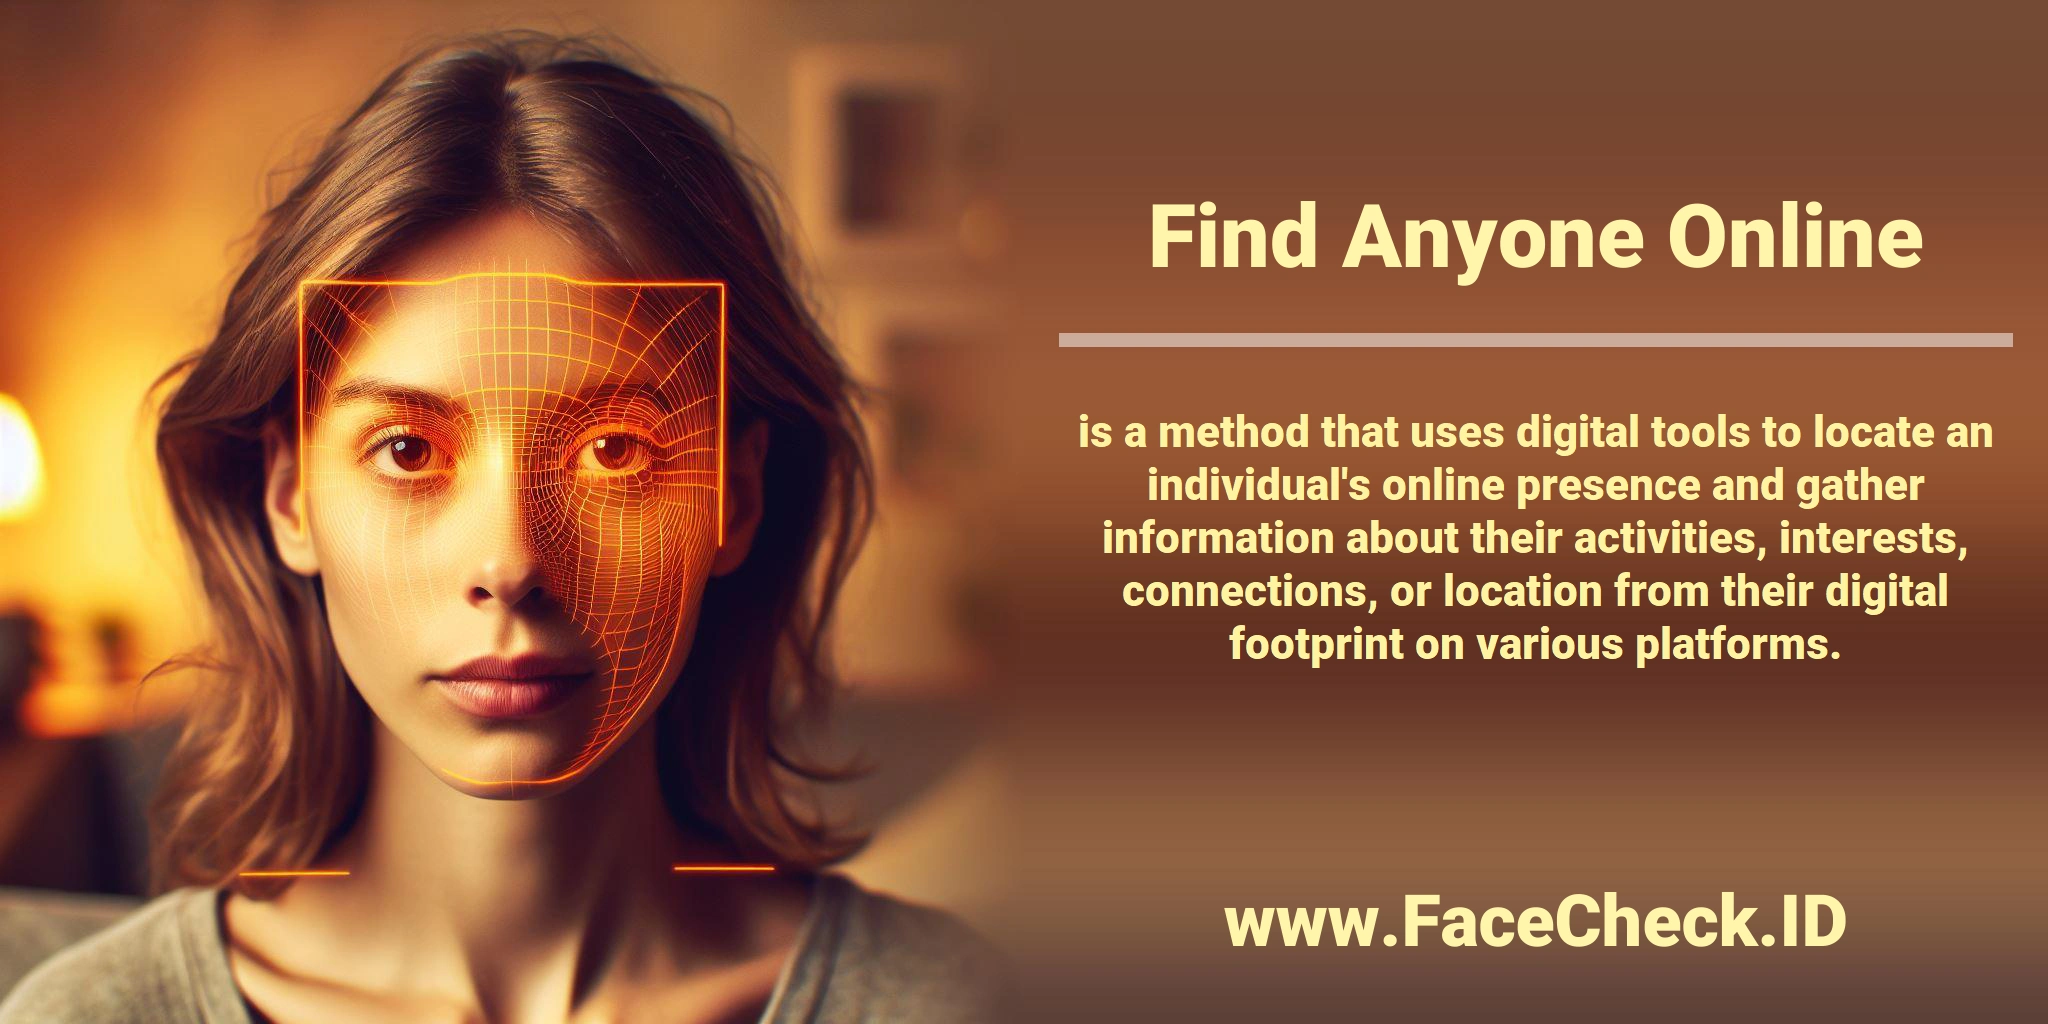 <b>Find Anyone Online</b> is a method that uses digital tools to locate an individual's online presence and gather information about their activities, interests, connections, or location from their digital footprint on various platforms.